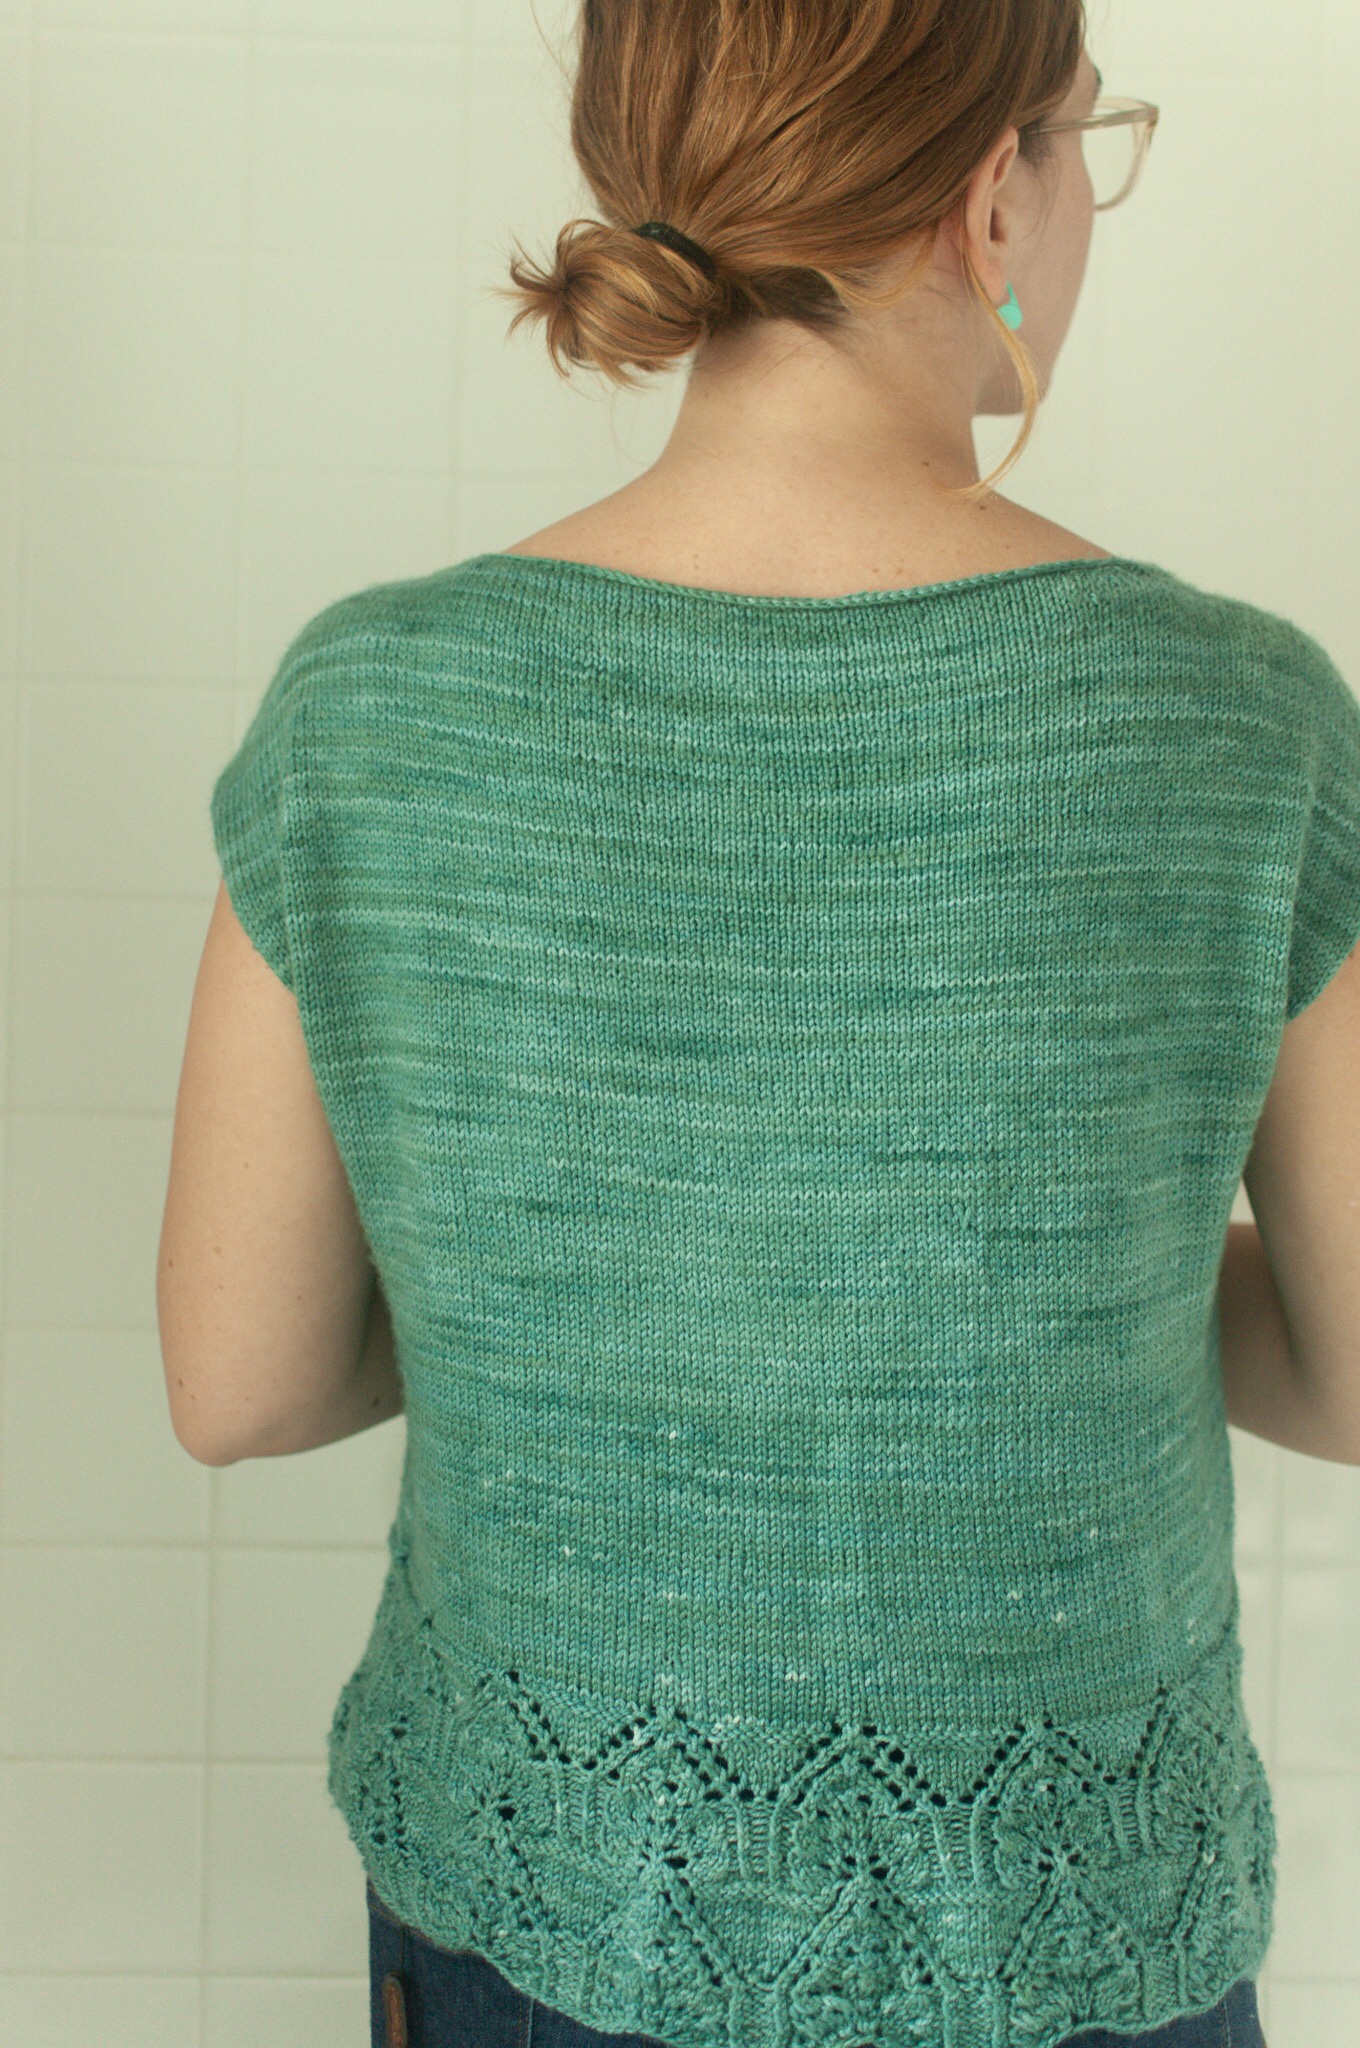 Woman models back of knitted crop top with lace edge